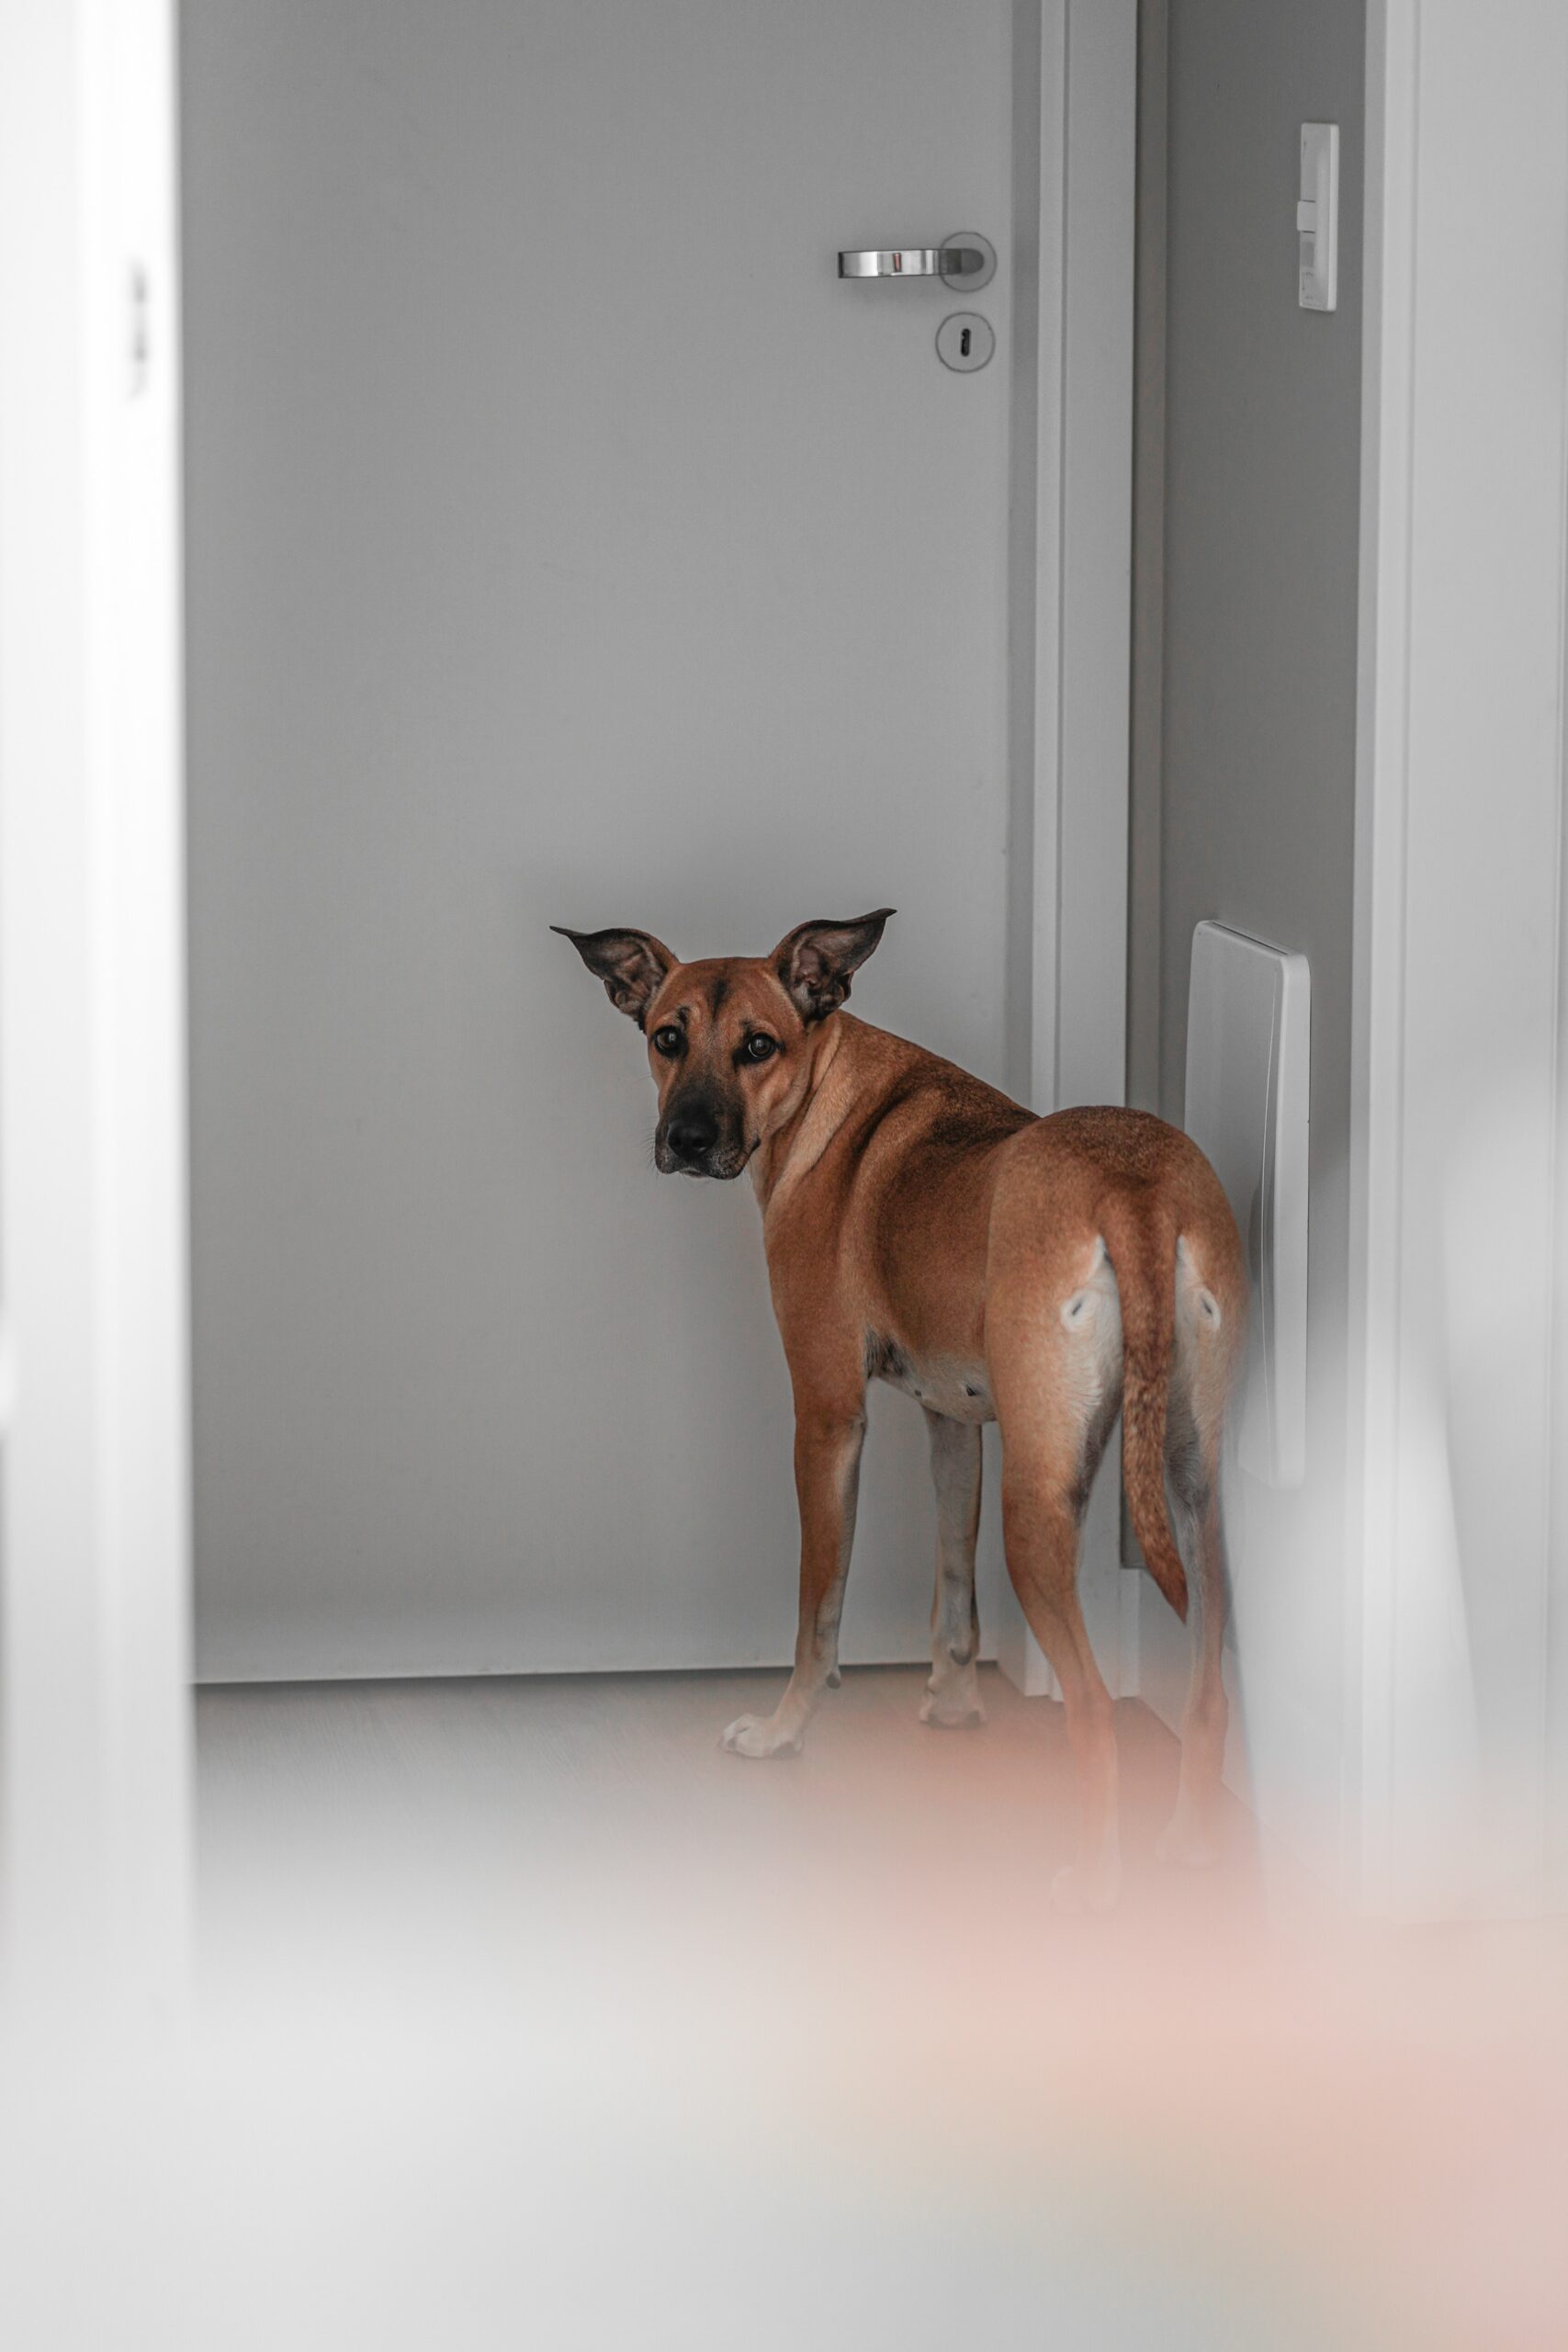 Dogs That Get Separation Anxiety: How to Help